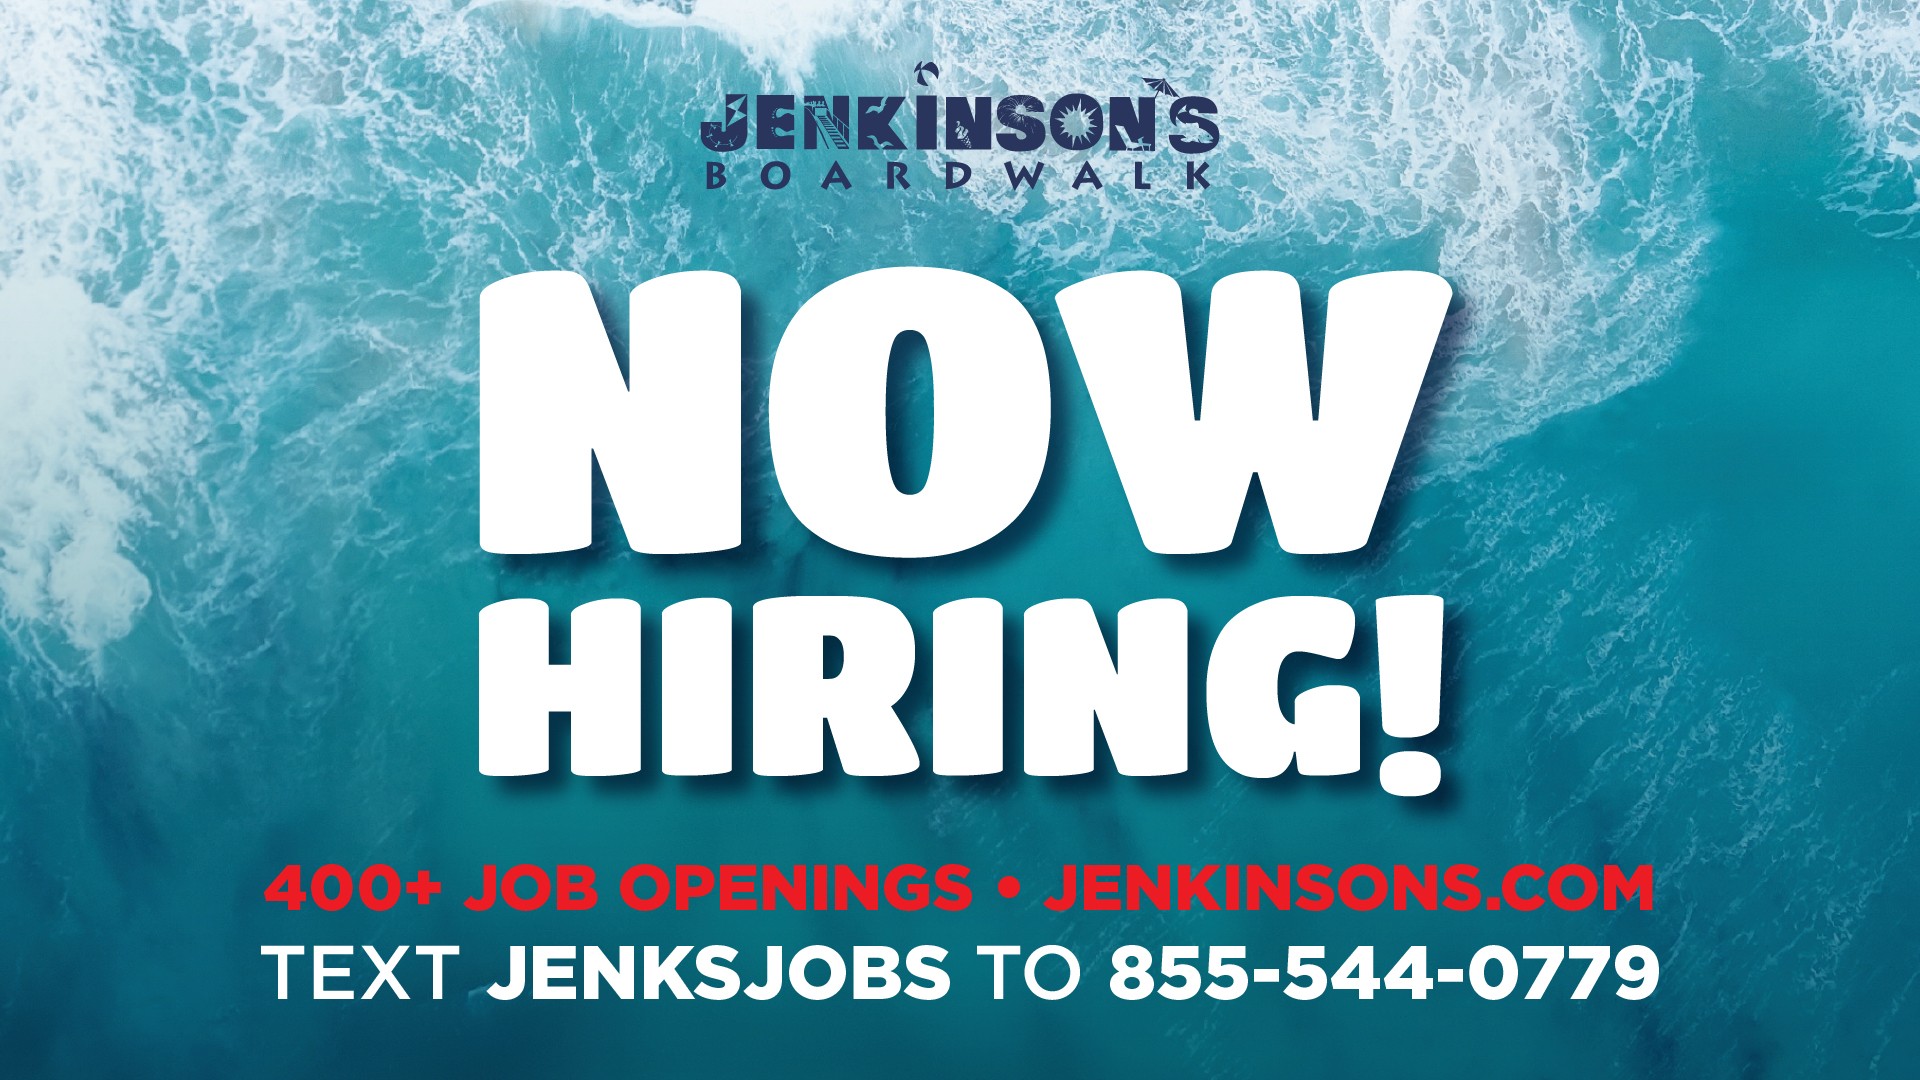 Jenkinson's Boardwalk is now hiring. Visit our website or text jenksjobs to 855-544-0779 to apply.